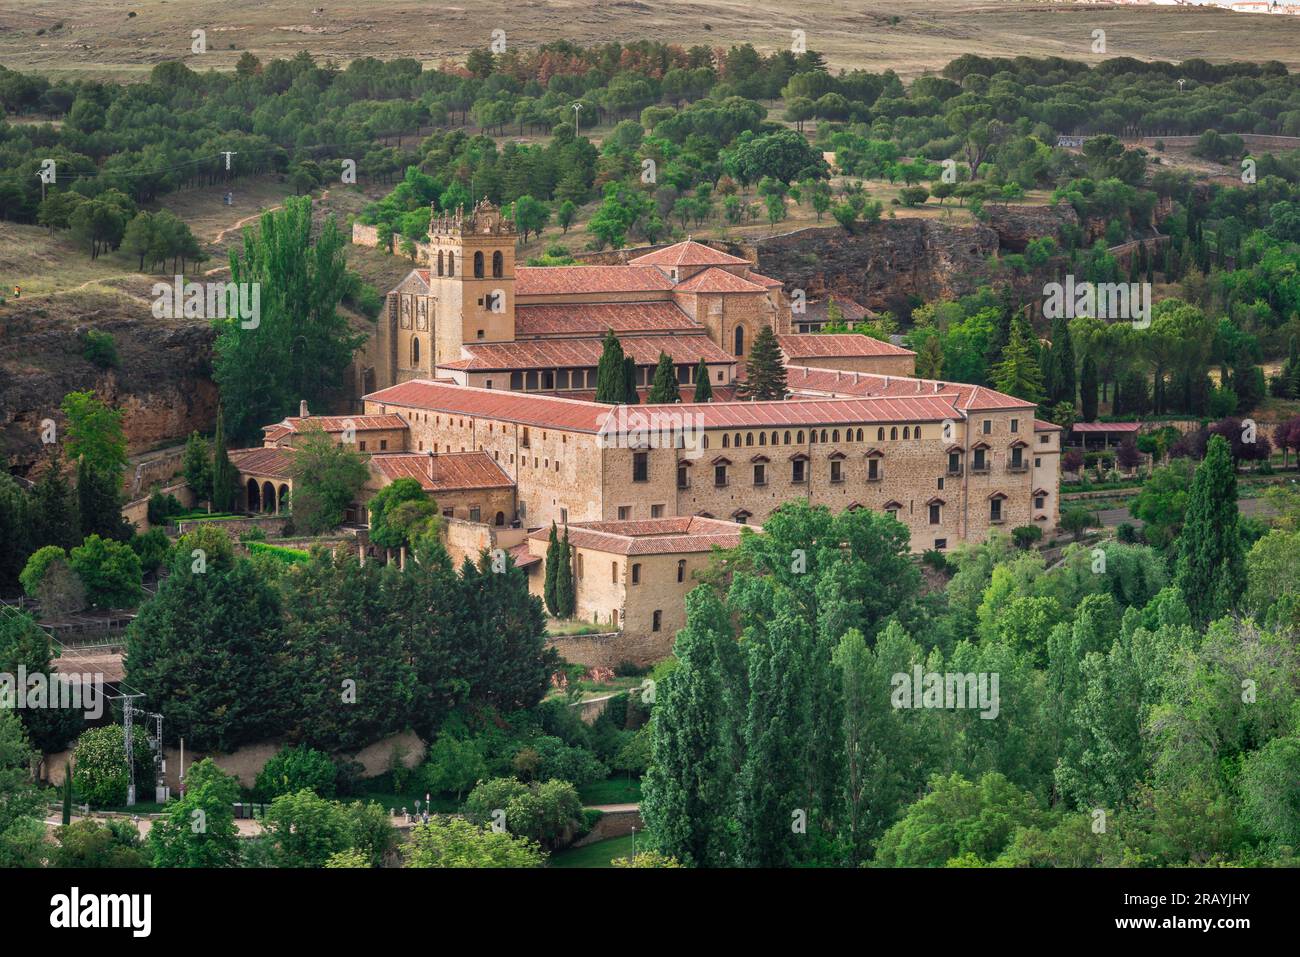 Segovia monastery, view in summer of the Monasterio de El Parral - a large monastic complex occupied by the Order of Hieronymites, Segovia, Spain Stock Photo